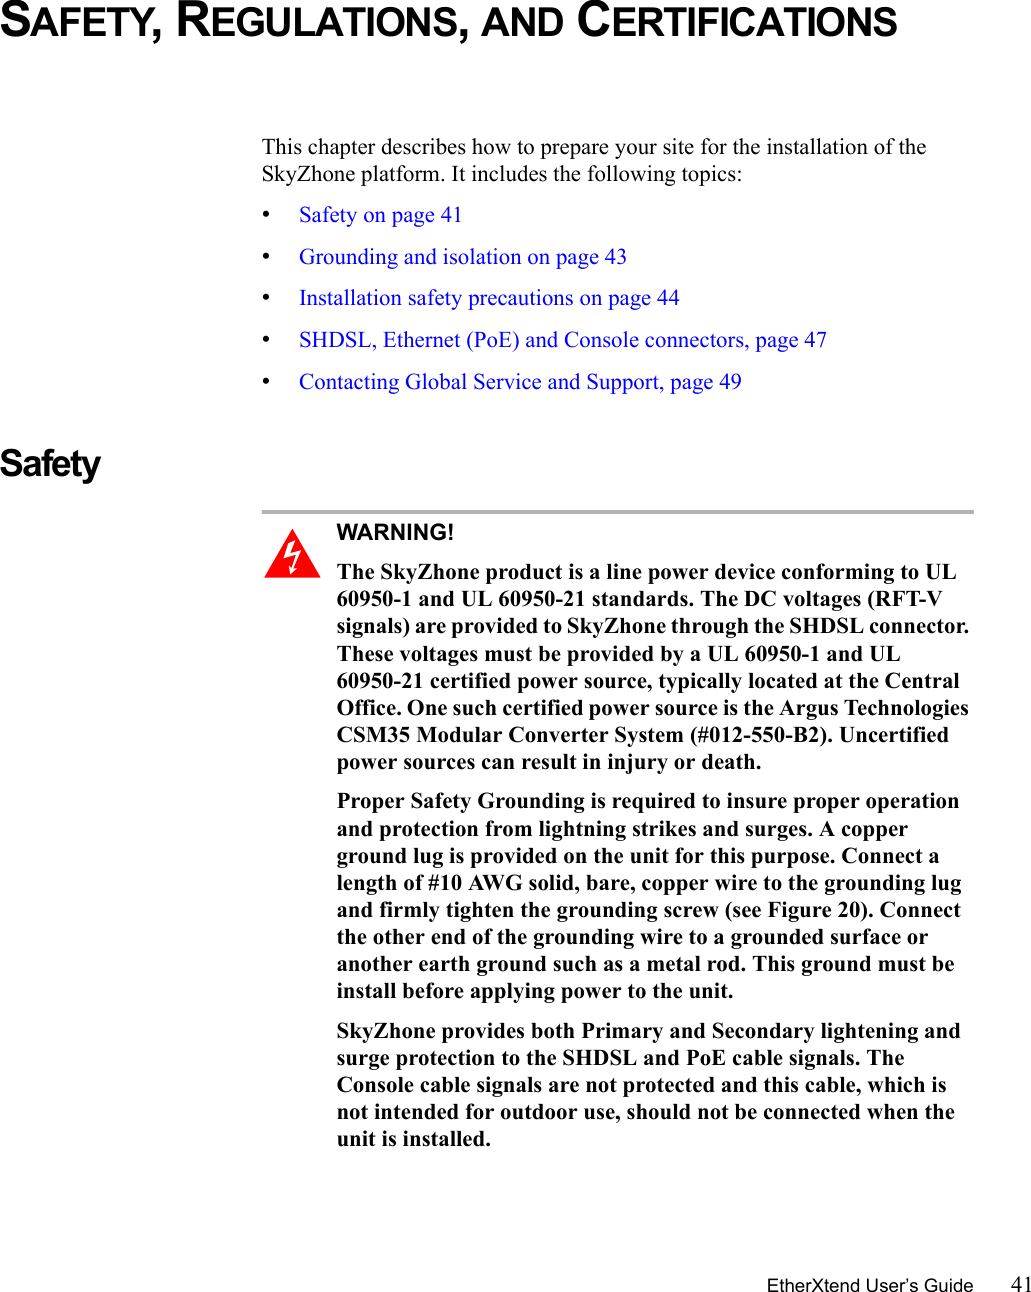 EtherXtend User’s Guide 41SAFETY, REGULATIONS, AND CERTIFICATIONSThis chapter describes how to prepare your site for the installation of the SkyZhone platform. It includes the following topics:•Safety on page 41•Grounding and isolation on page 43•Installation safety precautions on page 44•SHDSL, Ethernet (PoE) and Console connectors, page 47•Contacting Global Service and Support, page 49Safety WARNING!  The SkyZhone product is a line power device conforming to UL 60950-1 and UL 60950-21 standards. The DC voltages (RFT-V signals) are provided to SkyZhone through the SHDSL connector. These voltages must be provided by a UL 60950-1 and UL 60950-21 certified power source, typically located at the Central Office. One such certified power source is the Argus Technologies CSM35 Modular Converter System (#012-550-B2). Uncertified power sources can result in injury or death.Proper Safety Grounding is required to insure proper operation and protection from lightning strikes and surges. A copper ground lug is provided on the unit for this purpose. Connect a length of #10 AWG solid, bare, copper wire to the grounding lug and firmly tighten the grounding screw (see Figure 20). Connect the other end of the grounding wire to a grounded surface or another earth ground such as a metal rod. This ground must be install before applying power to the unit.SkyZhone provides both Primary and Secondary lightening and surge protection to the SHDSL and PoE cable signals. The Console cable signals are not protected and this cable, which is not intended for outdoor use, should not be connected when the unit is installed.